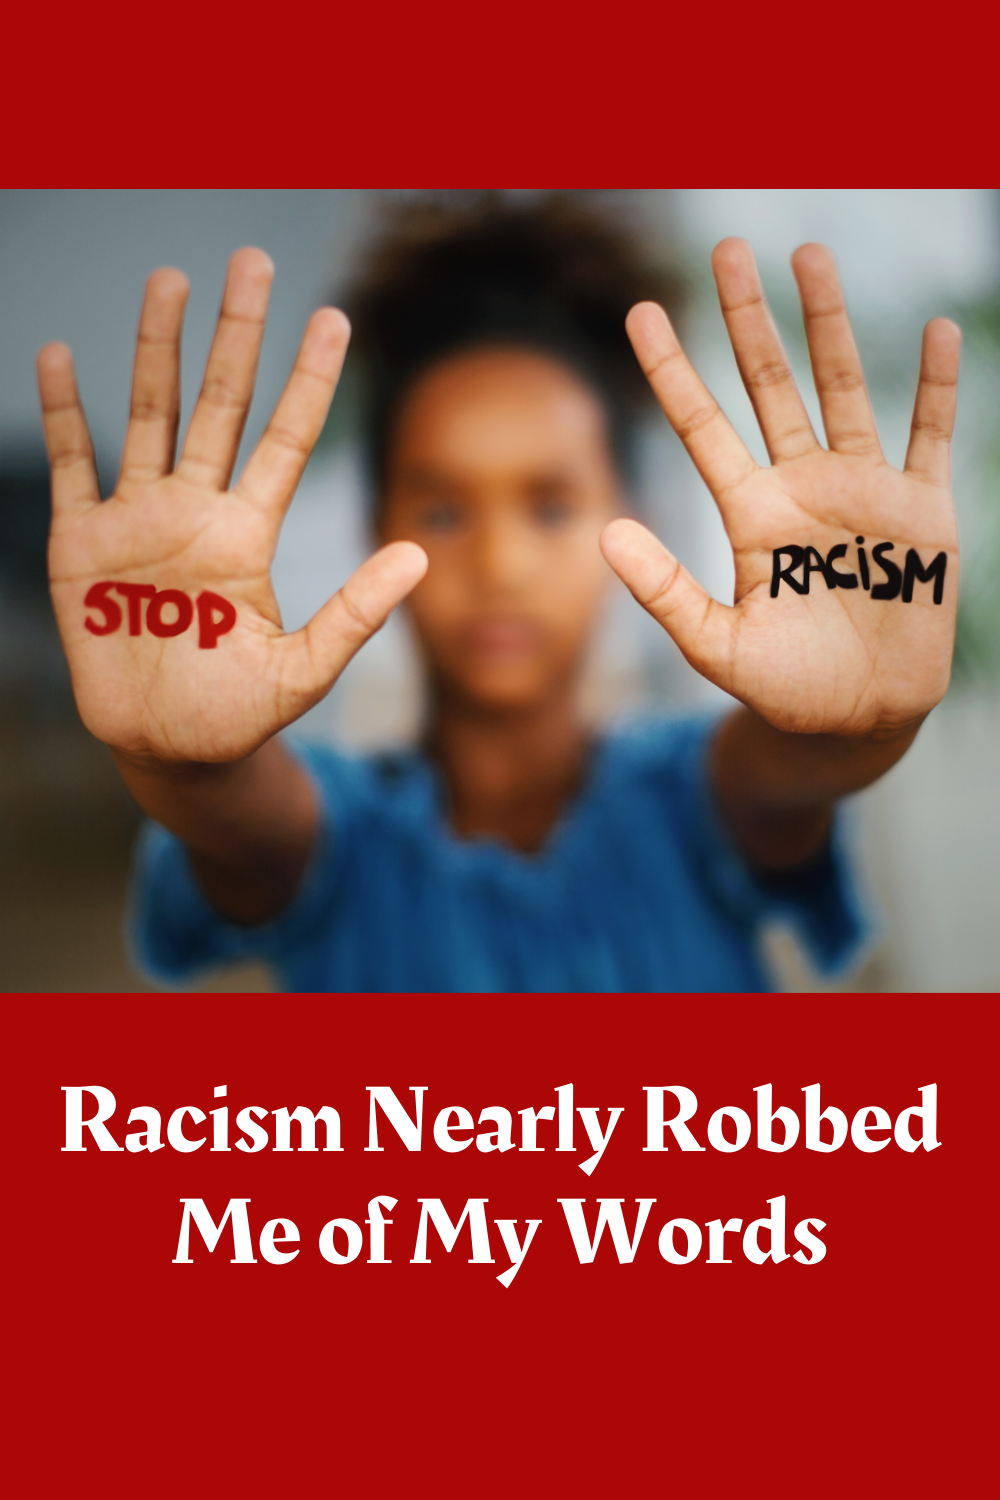 A young girl holding up her hands with stop racism painted on her palms.